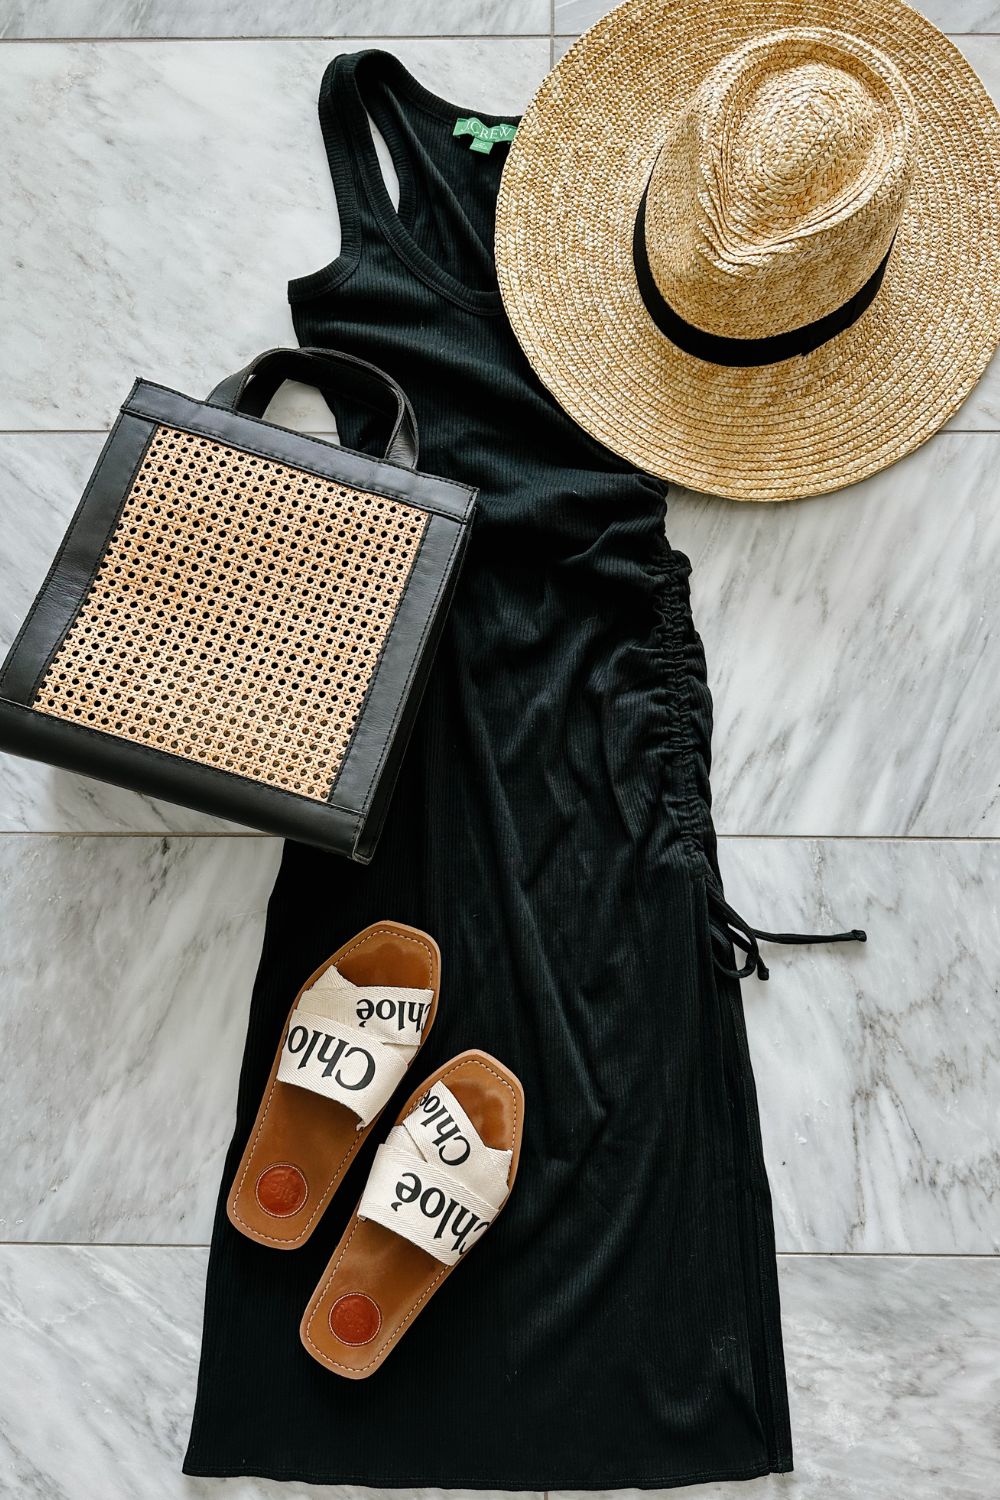 A midi dress styled with a straw hat, straw bag, and sandals 